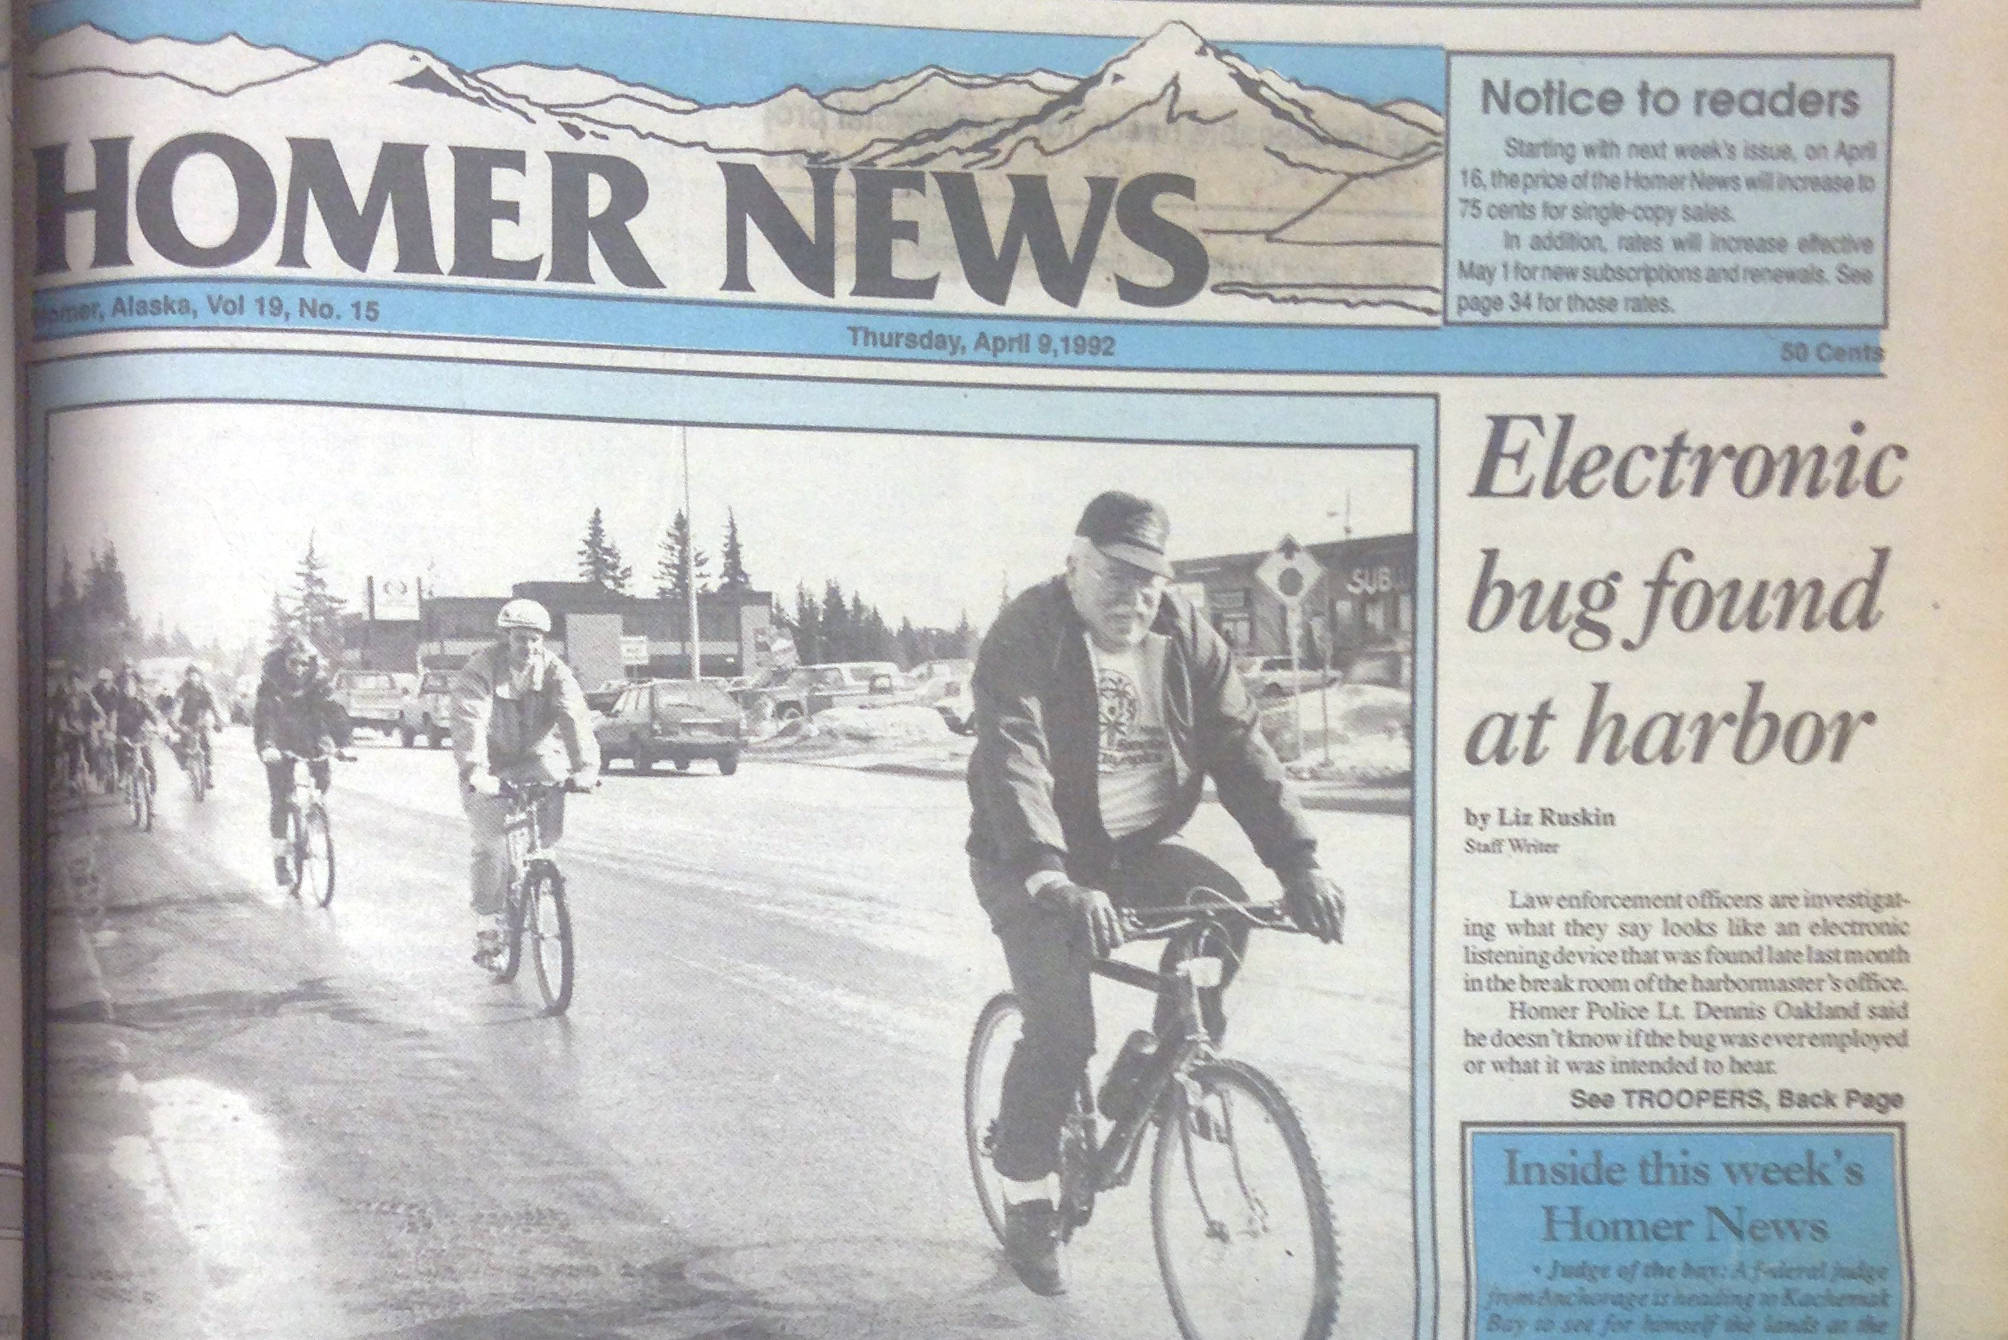 The cover of the April 3, 1992 Homer News, the last issue before the price increased from 50 cents to 75 cents. (Photo by Michael Armstrong/Homer News)